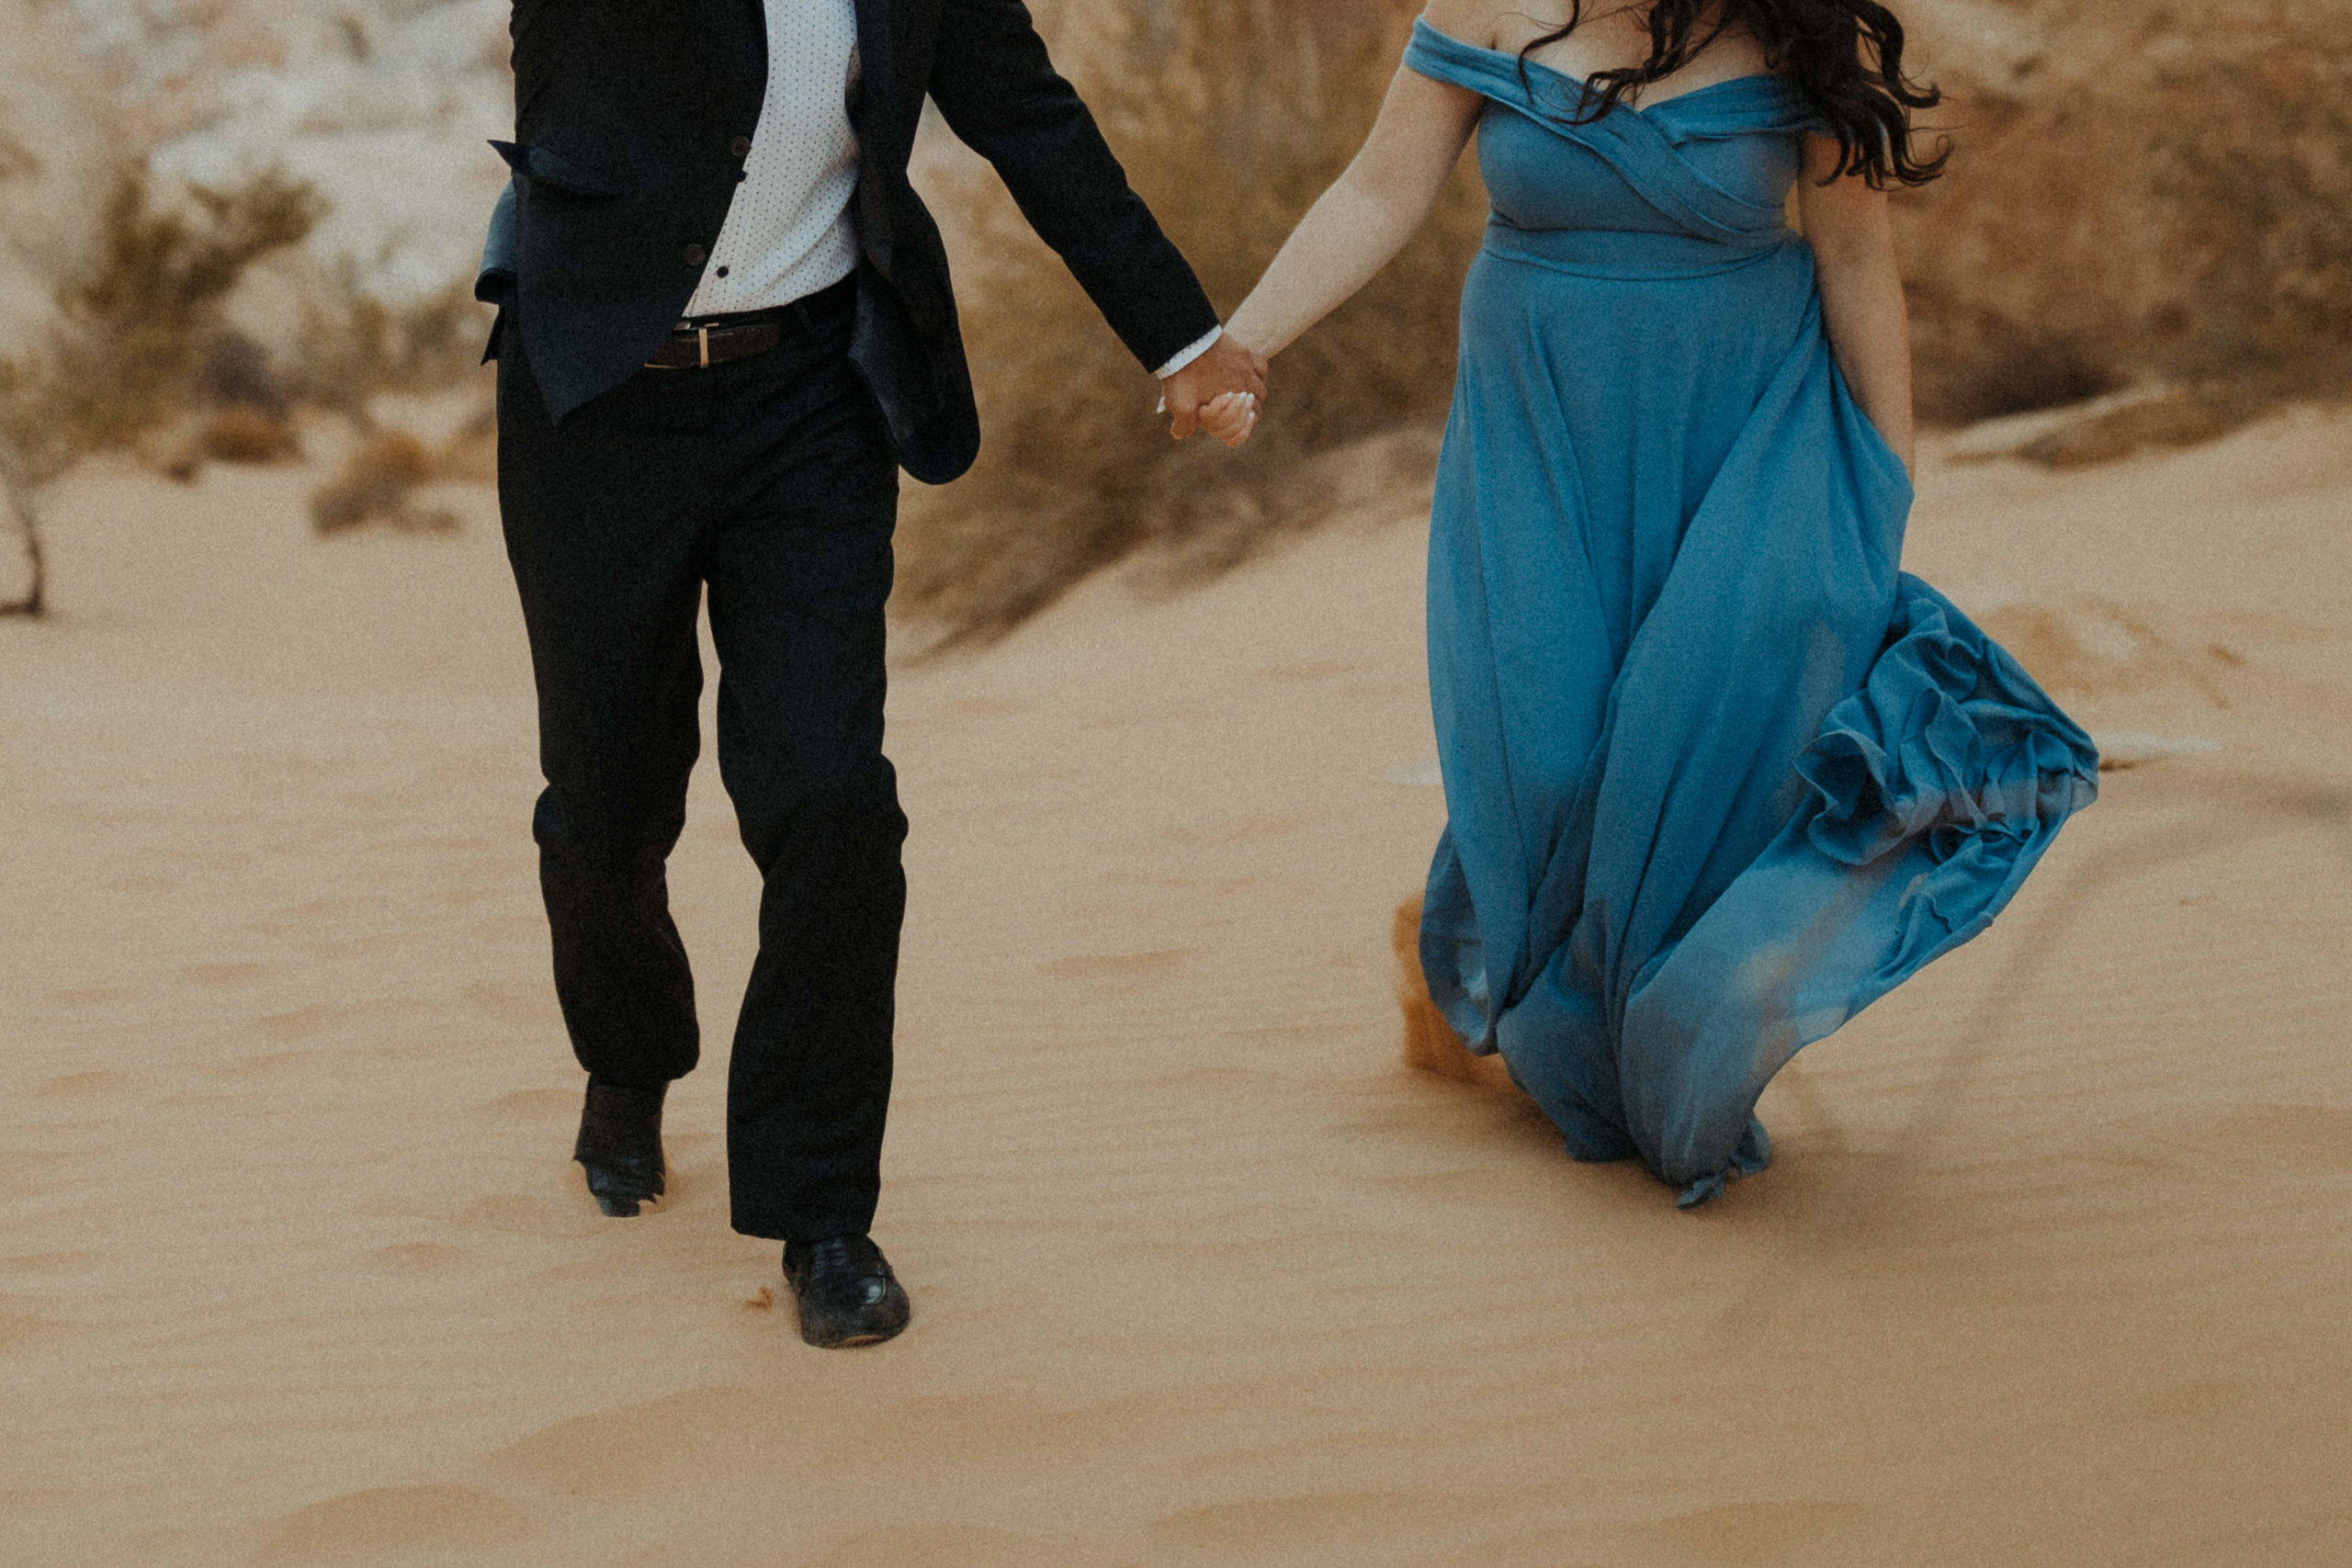 Couple Holding hands in desert while wearing formal clothes